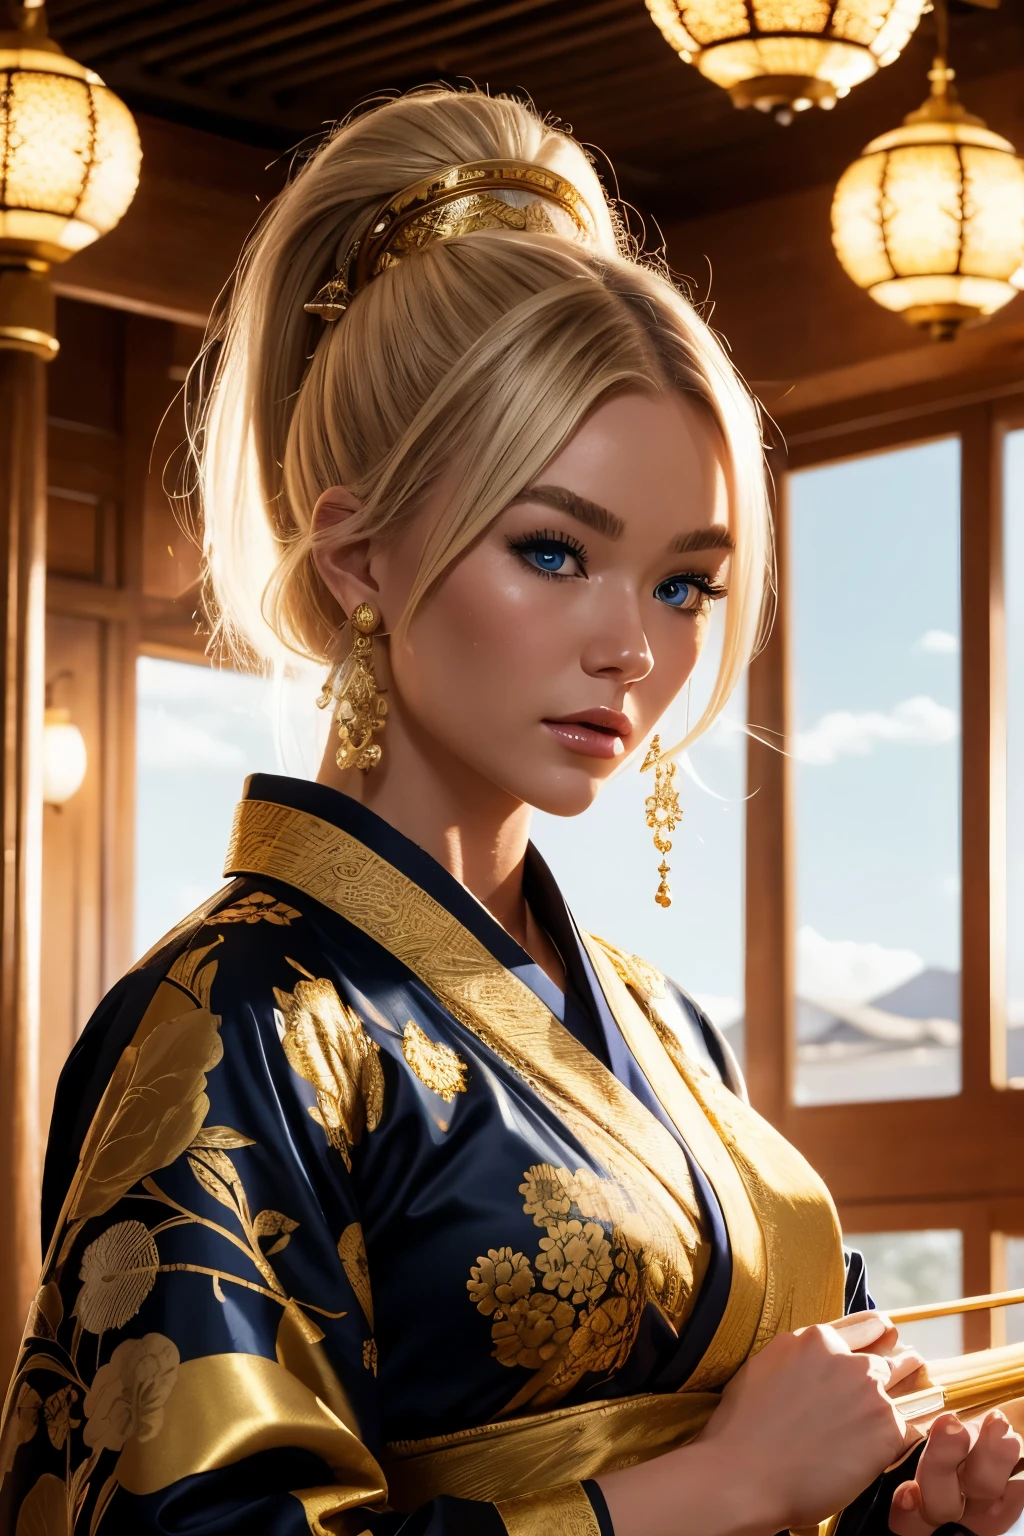 Causasian blonde woman, elegantly dressed in a vibrant, hyperrealistic black and gold silk kimono adorned with glittering gold folklore patterns, sits serenely in a dojo. Gold string curtains veil the background, cascading gracefully. She skillfully plays the drums with an intense focus, her blonde hair swept back, framing her delicate features. Her expressive blue eyes shine brightly under cinematic lighting, captivating the viewer's attention. The unreal engine rendered image showcases every intricate detail of the woman's intricately designed kimono and the mesmerizing dojo setting. The 32k,